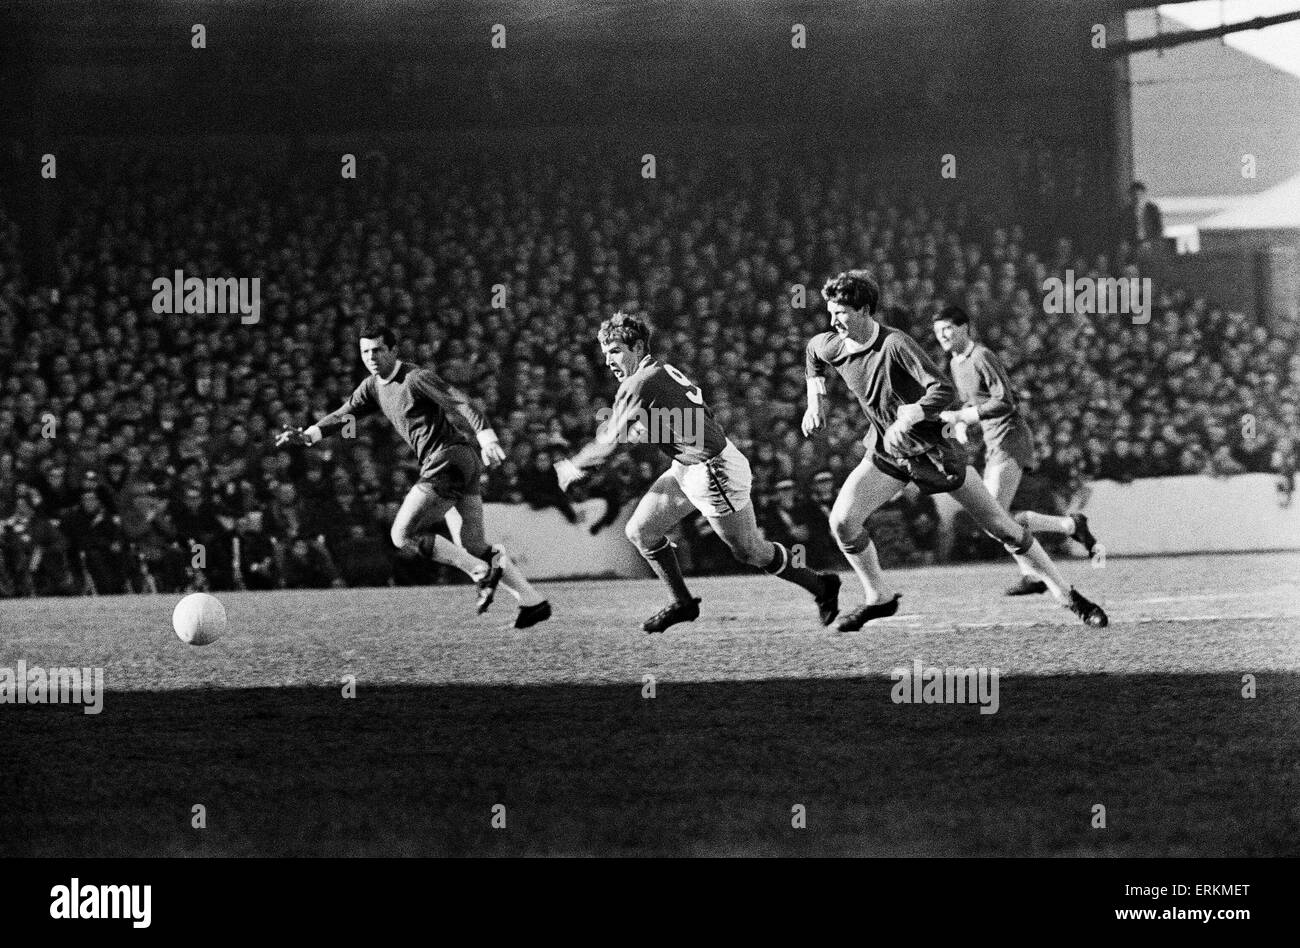 FA Cup Fifth Round match at the City Ground. Nottingham Forest 0 v Swindon Town 0. 11th March 1967. Stock Photo